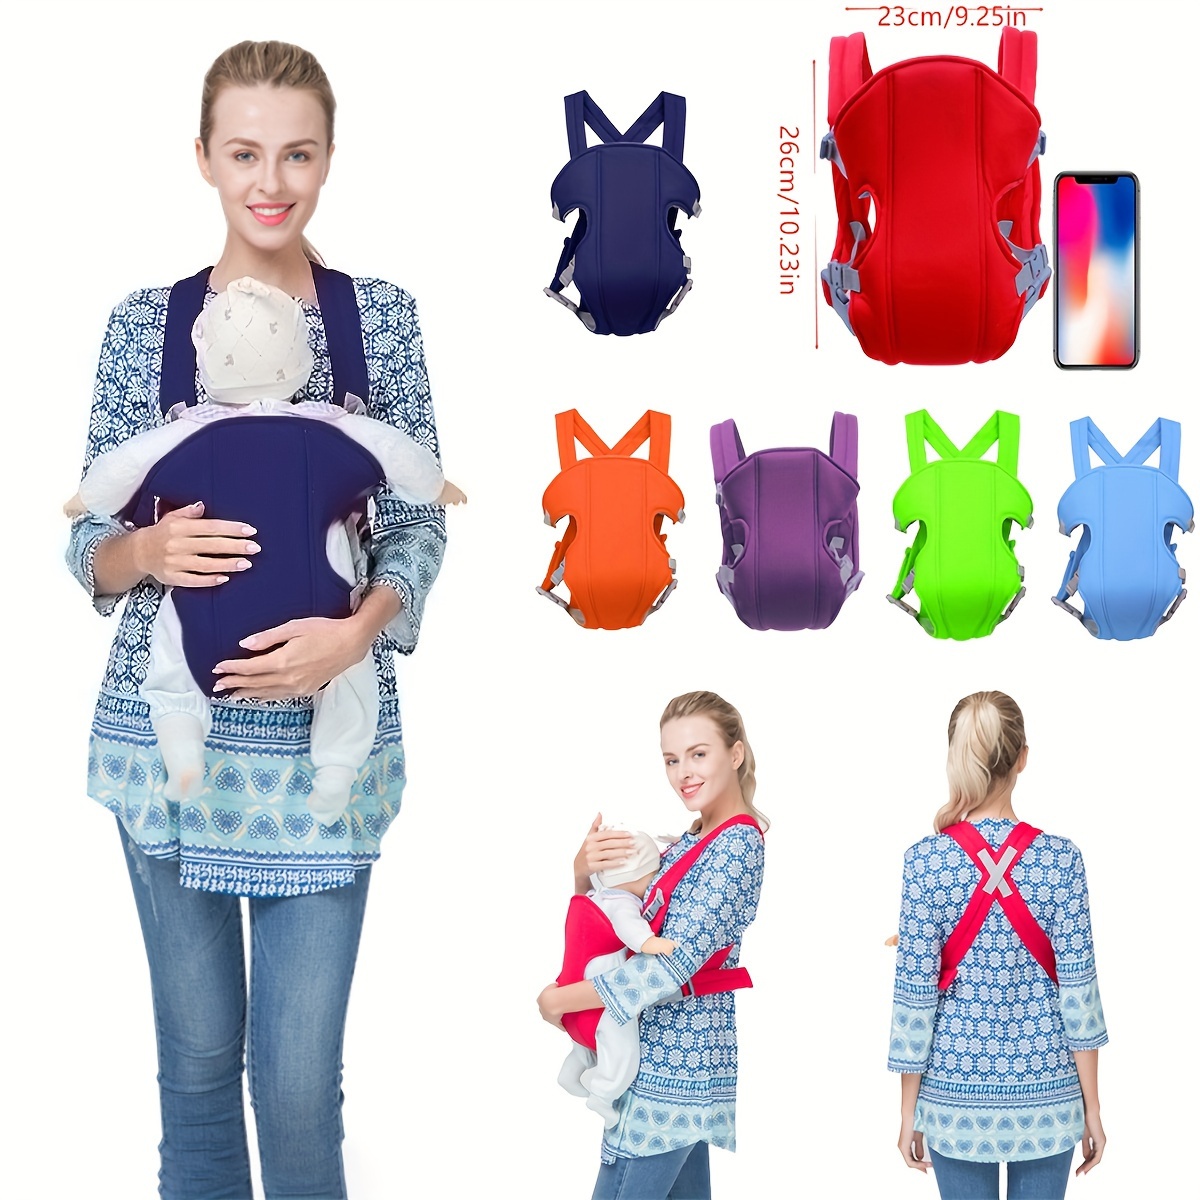 Baby Carrier Newborn Sling, Infants Soft Carriers For Toddlers Sling Wrap  Front And Back, Ergonomic Design 4 In 1 Multi-functional Breathable  Adjustab